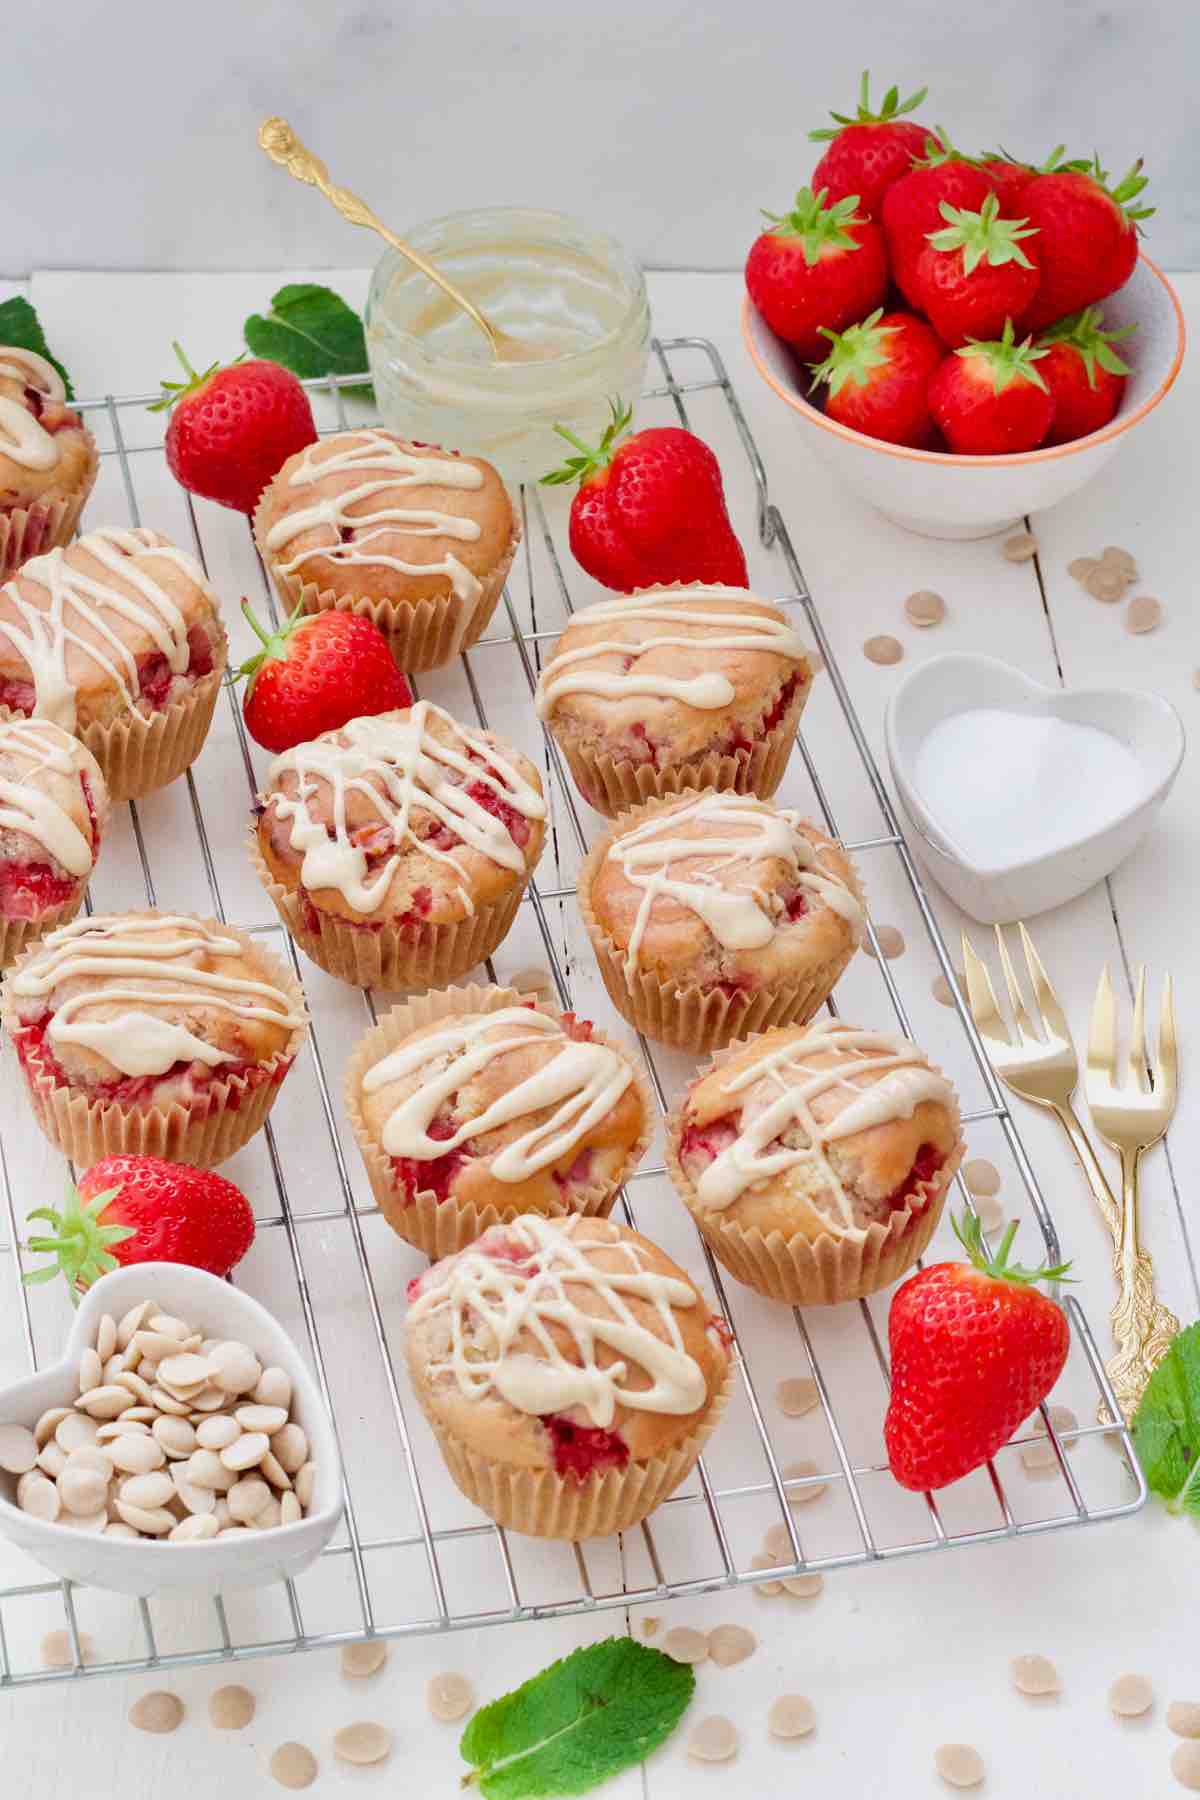 Strawberry muffins on a rack, fresh strawberries, mint leaves, white chocolate chips.